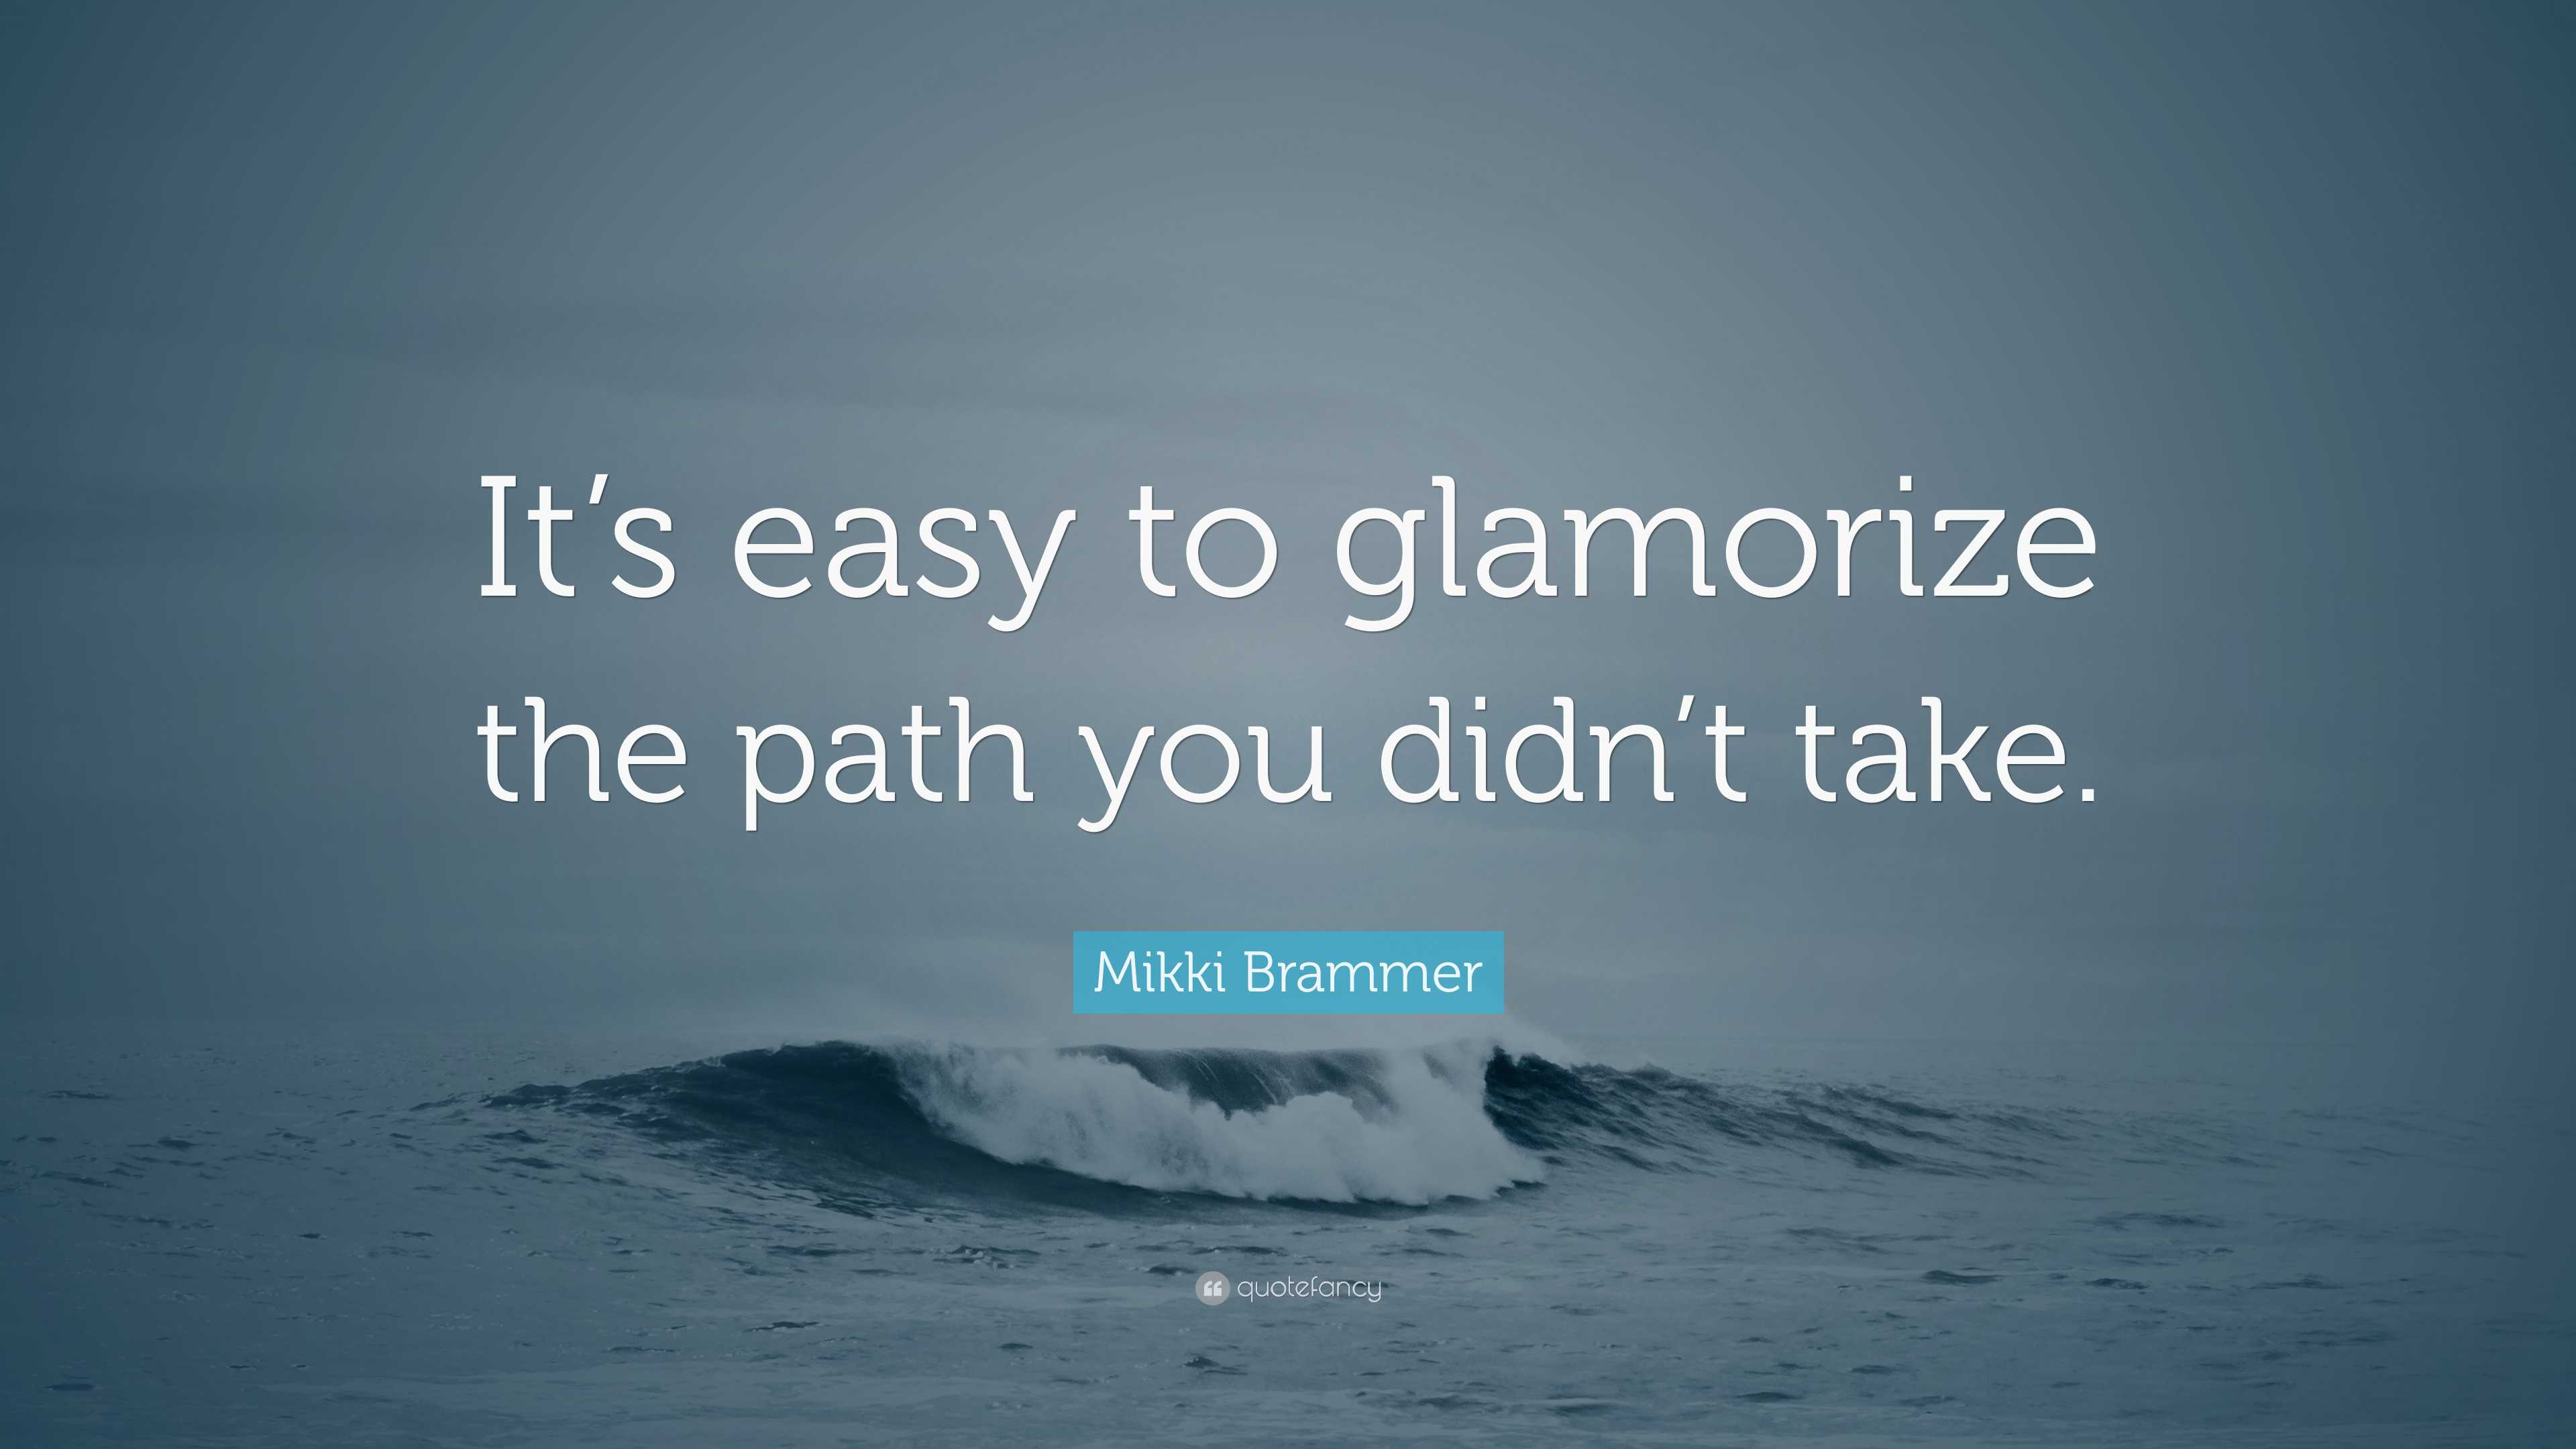 Mikki Brammer Quote: “It's easy to glamorize the path you didn't